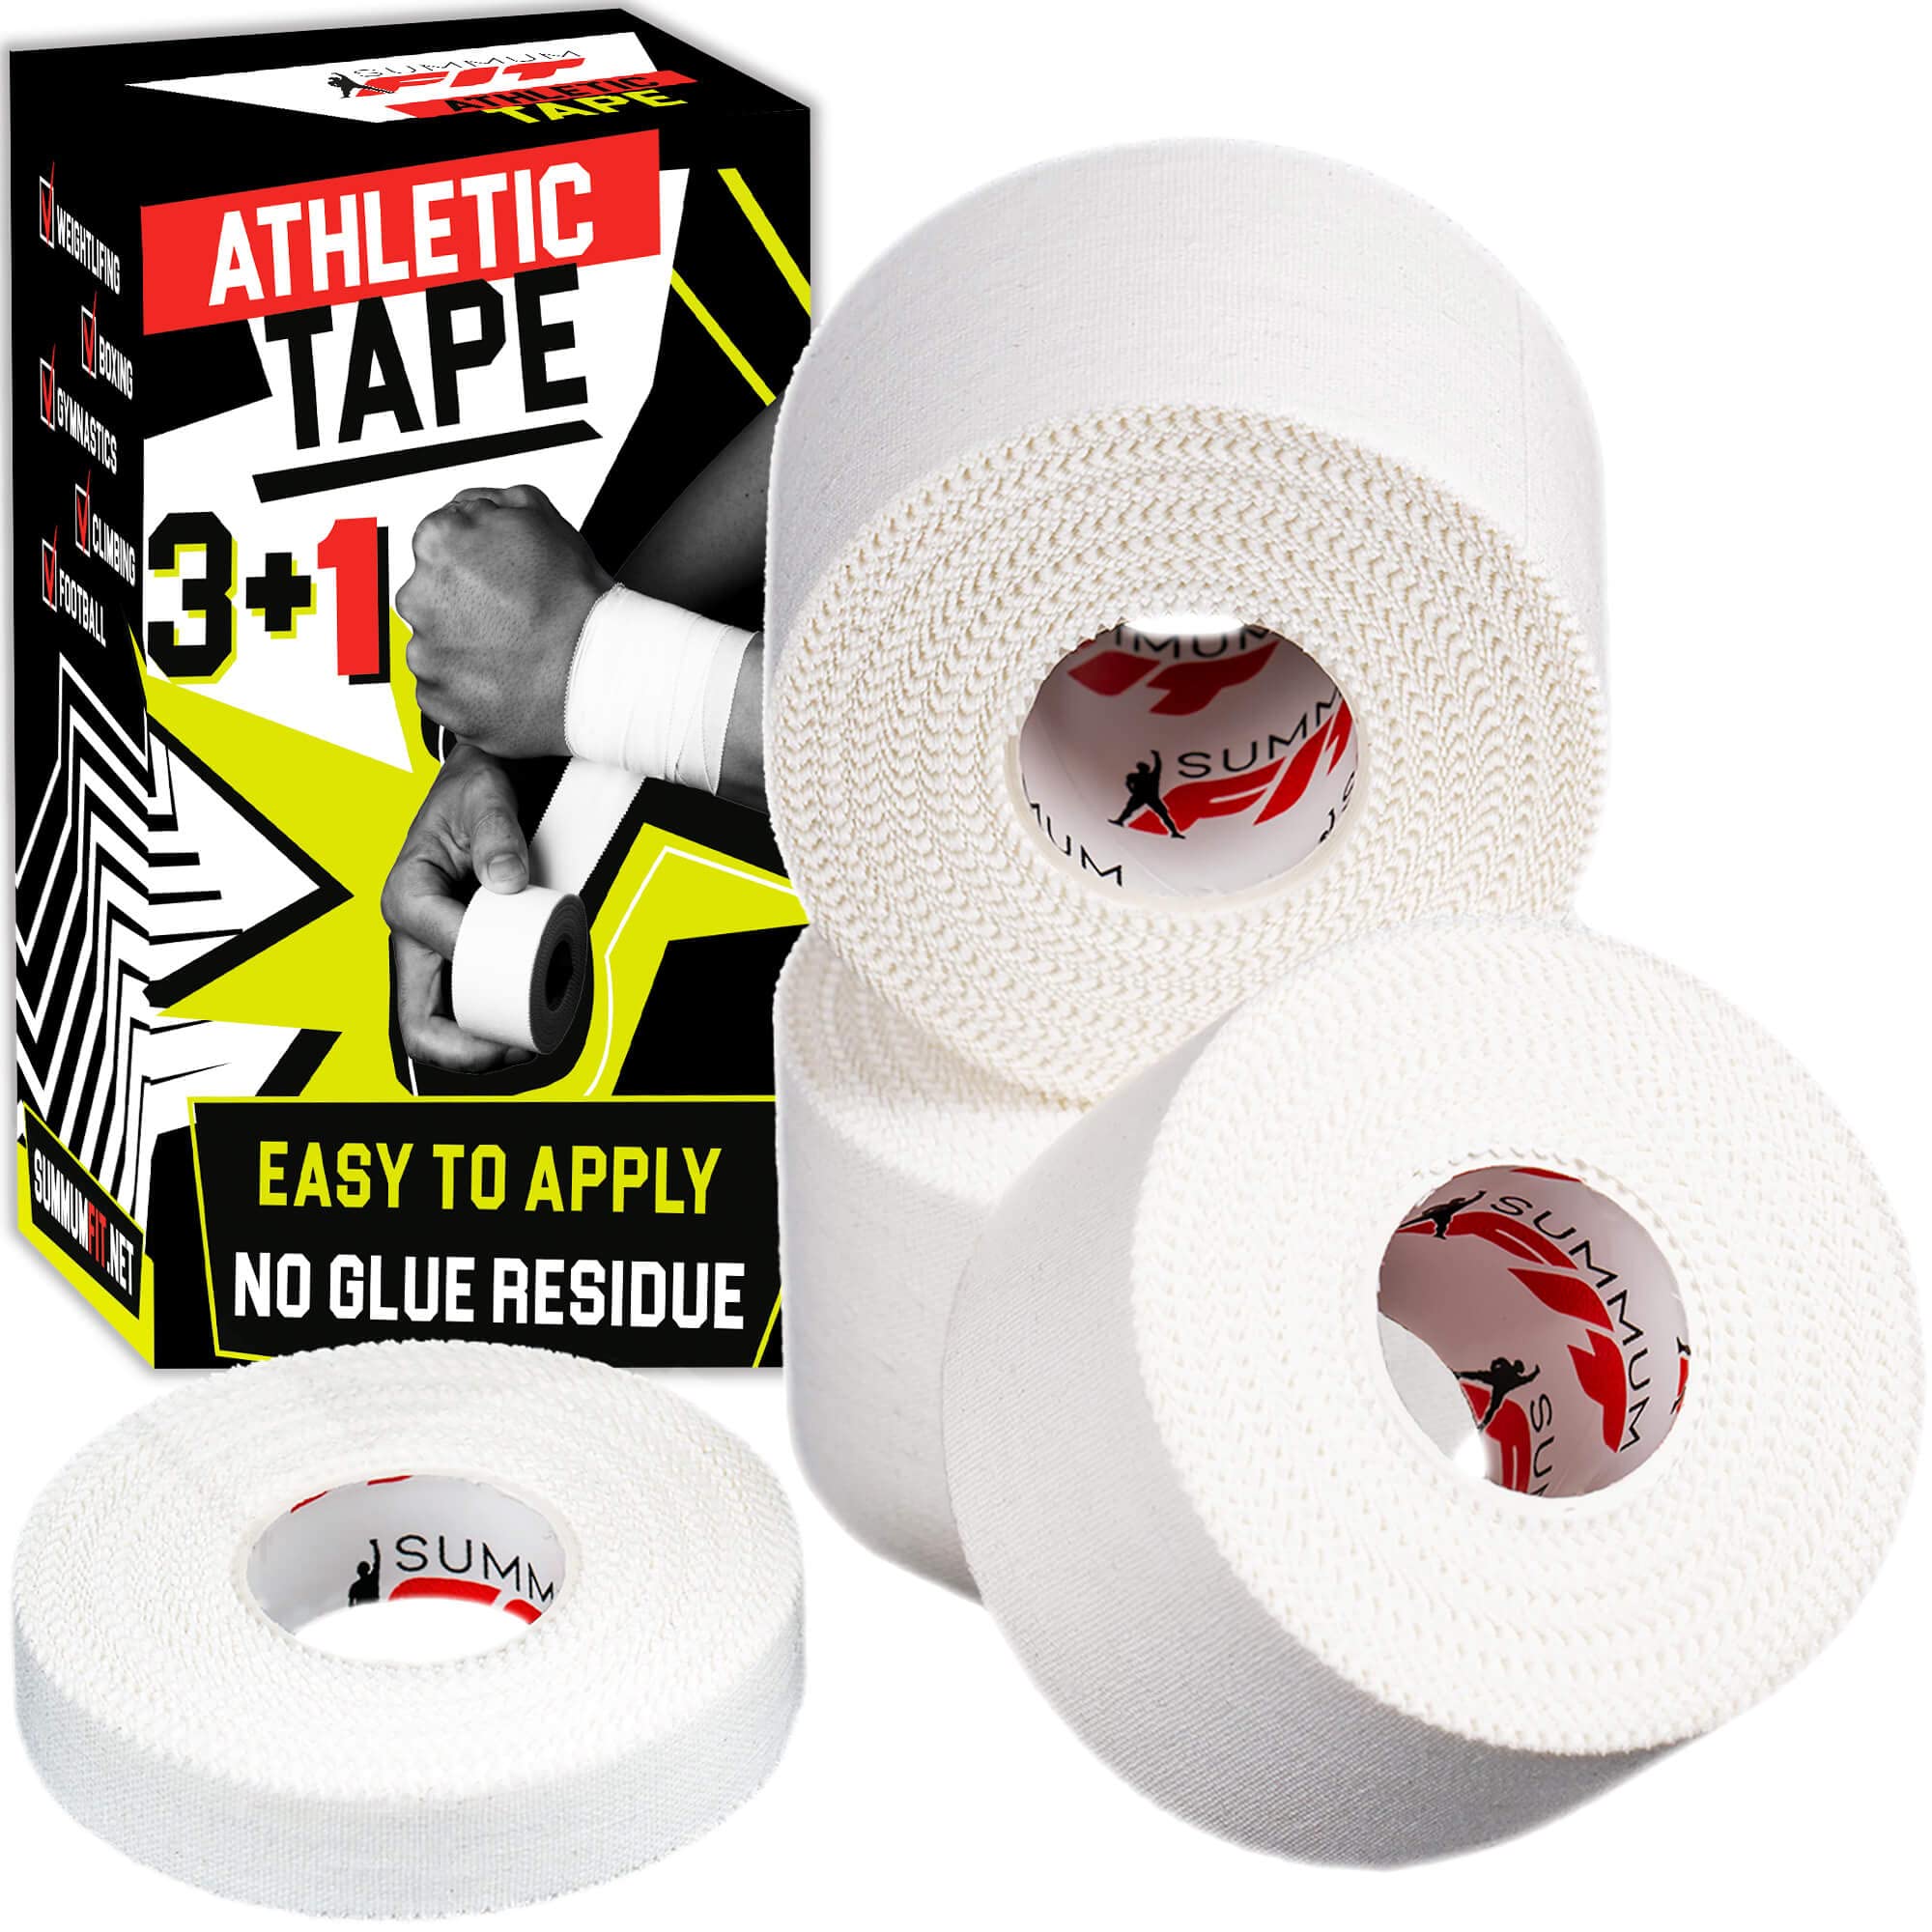 APE TAPE - The BEST THUMB TAPE in the GAME